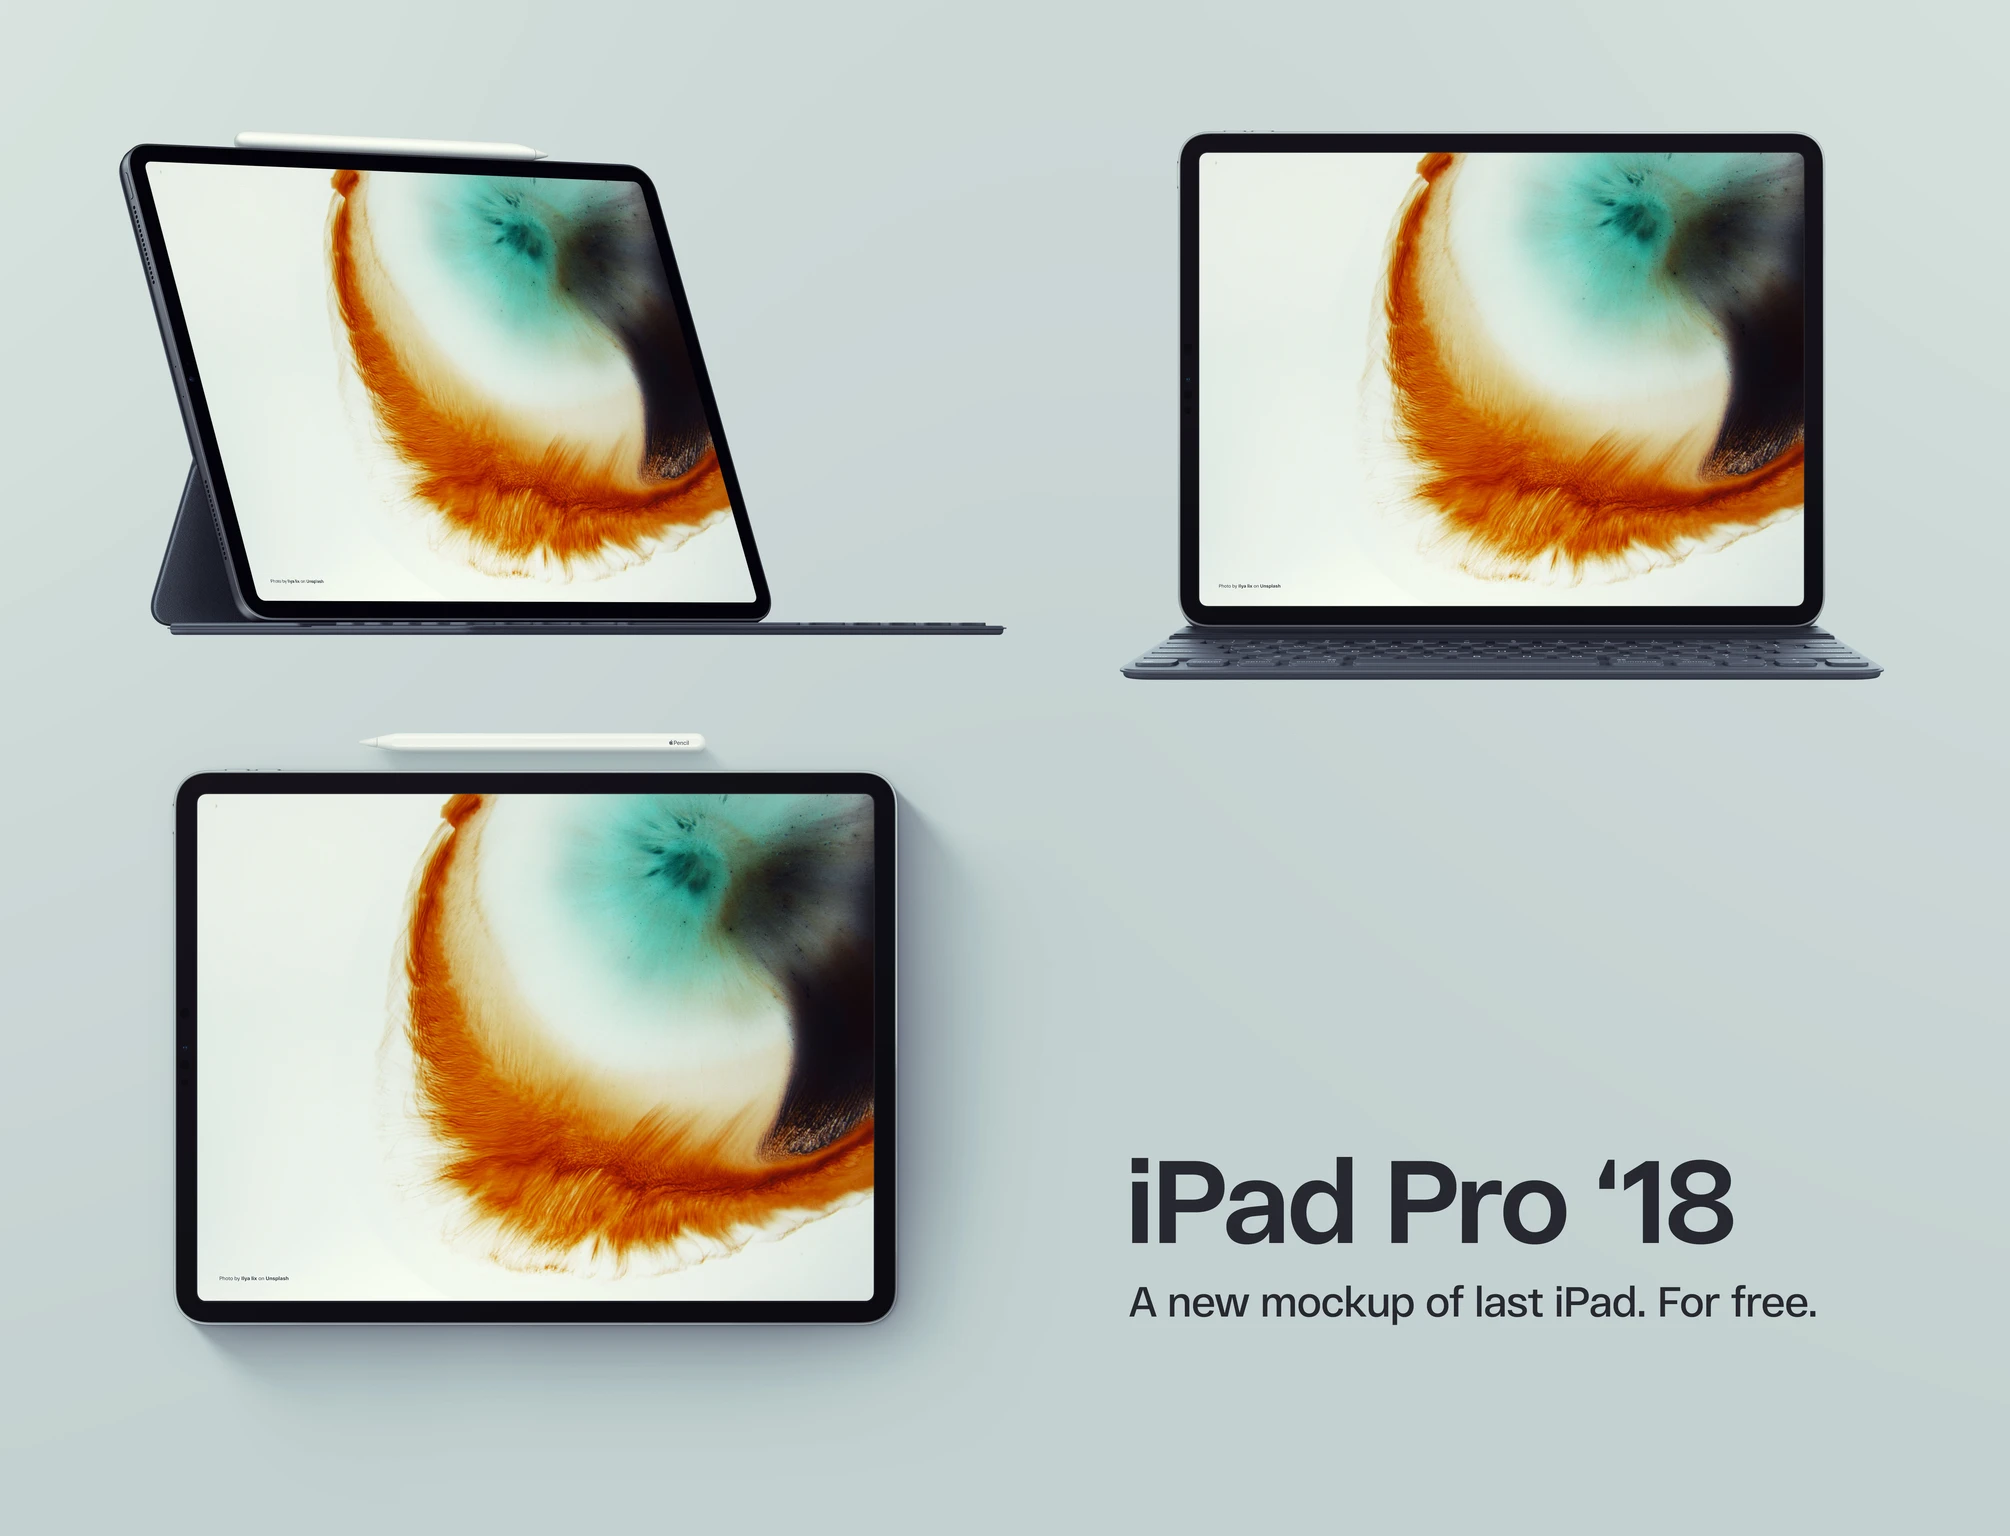 Ipad Pro 2018 Free Psd Mockups - 3 iPad Pro 2018 mockups available to download for free in Photoshop PSD format. Freebie designed by Arlekino